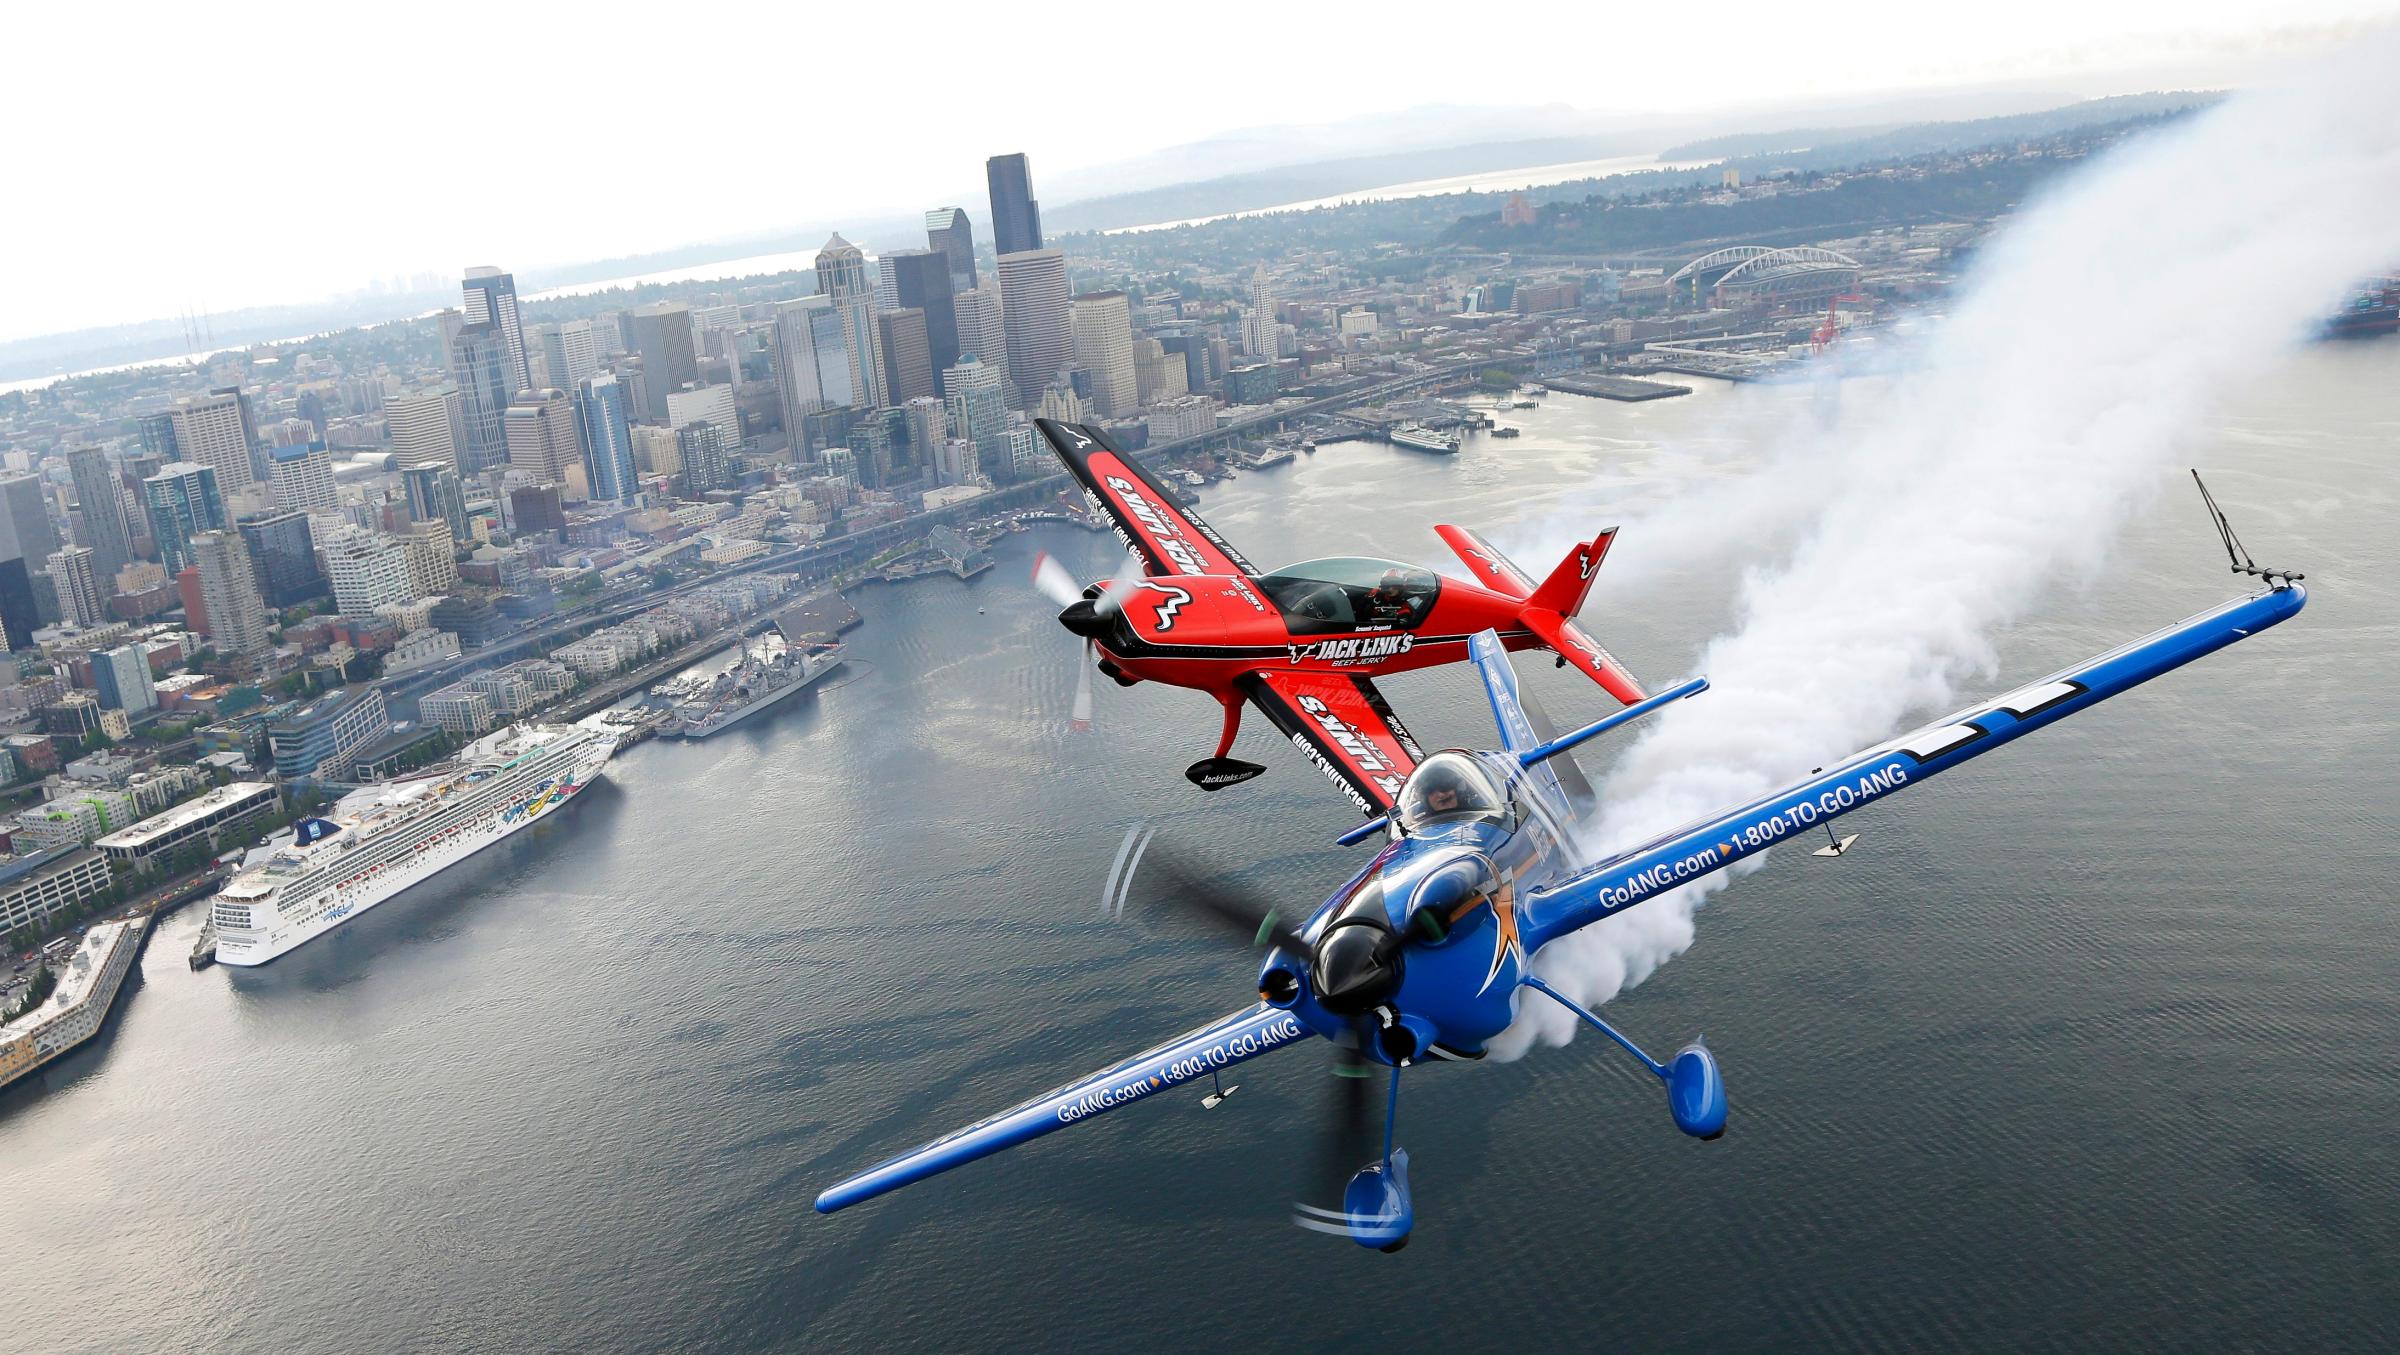 Pilots John Klatt, right, flying the blue Air National Guard MX-S airplane, and Jeff Boerboon, left, flying the red Jack's Links Extra 300L airplane, fly in formation above Seattle on Aug. 2, 2014.